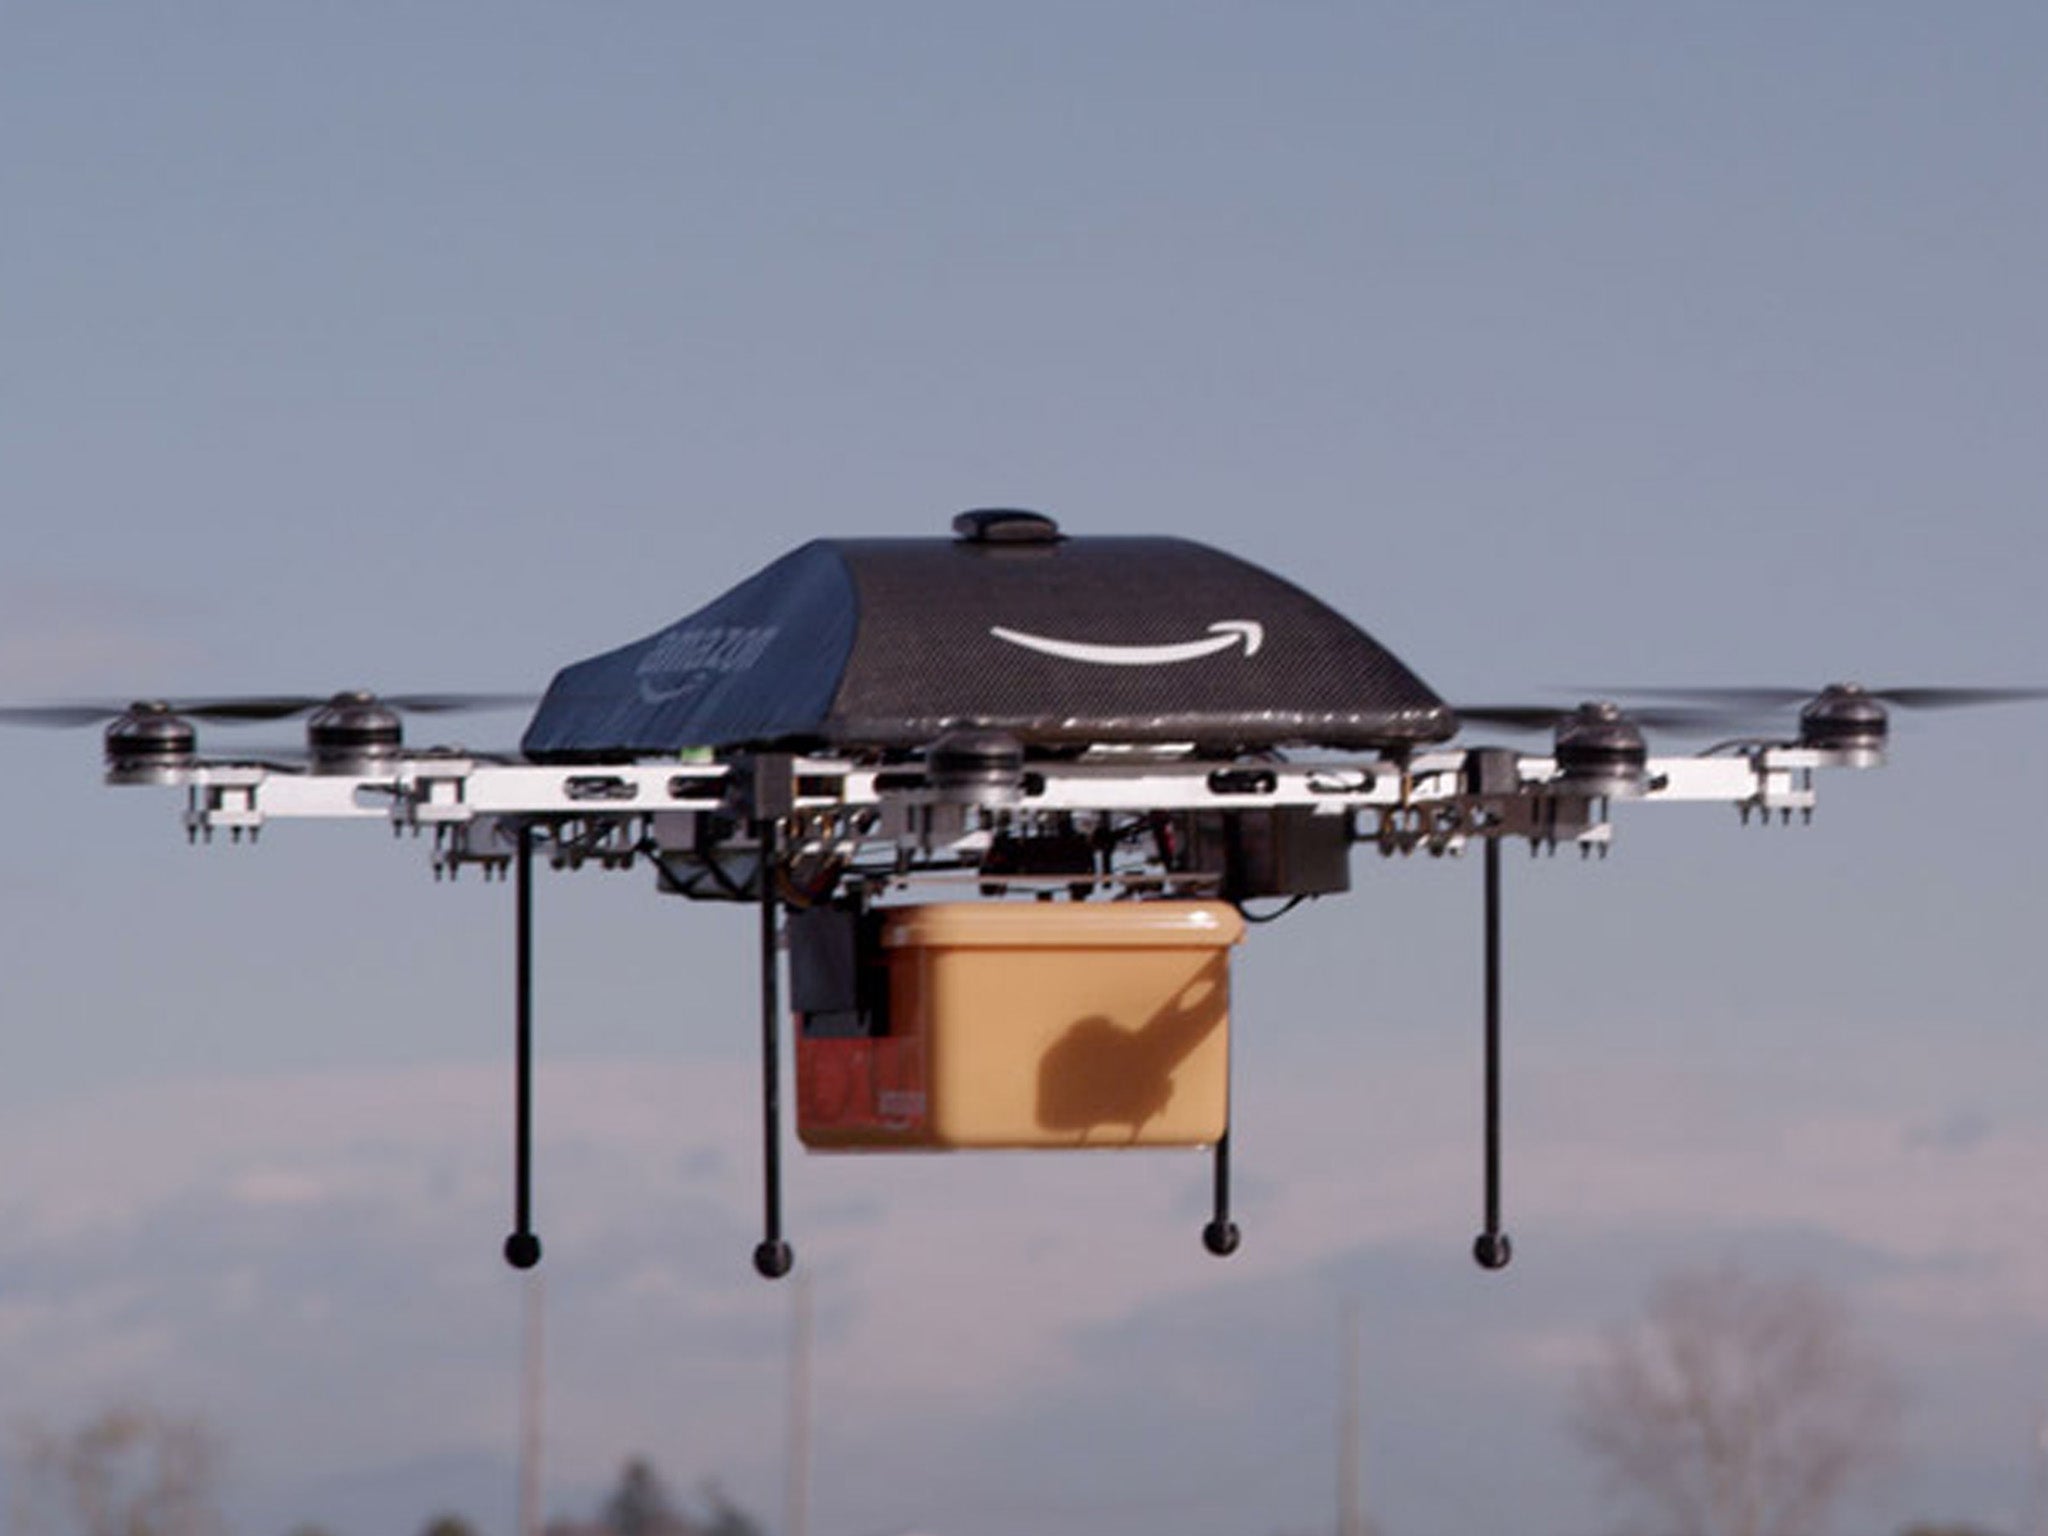 Amazon's ‘octocopter' drones could be making deliveries by 2015